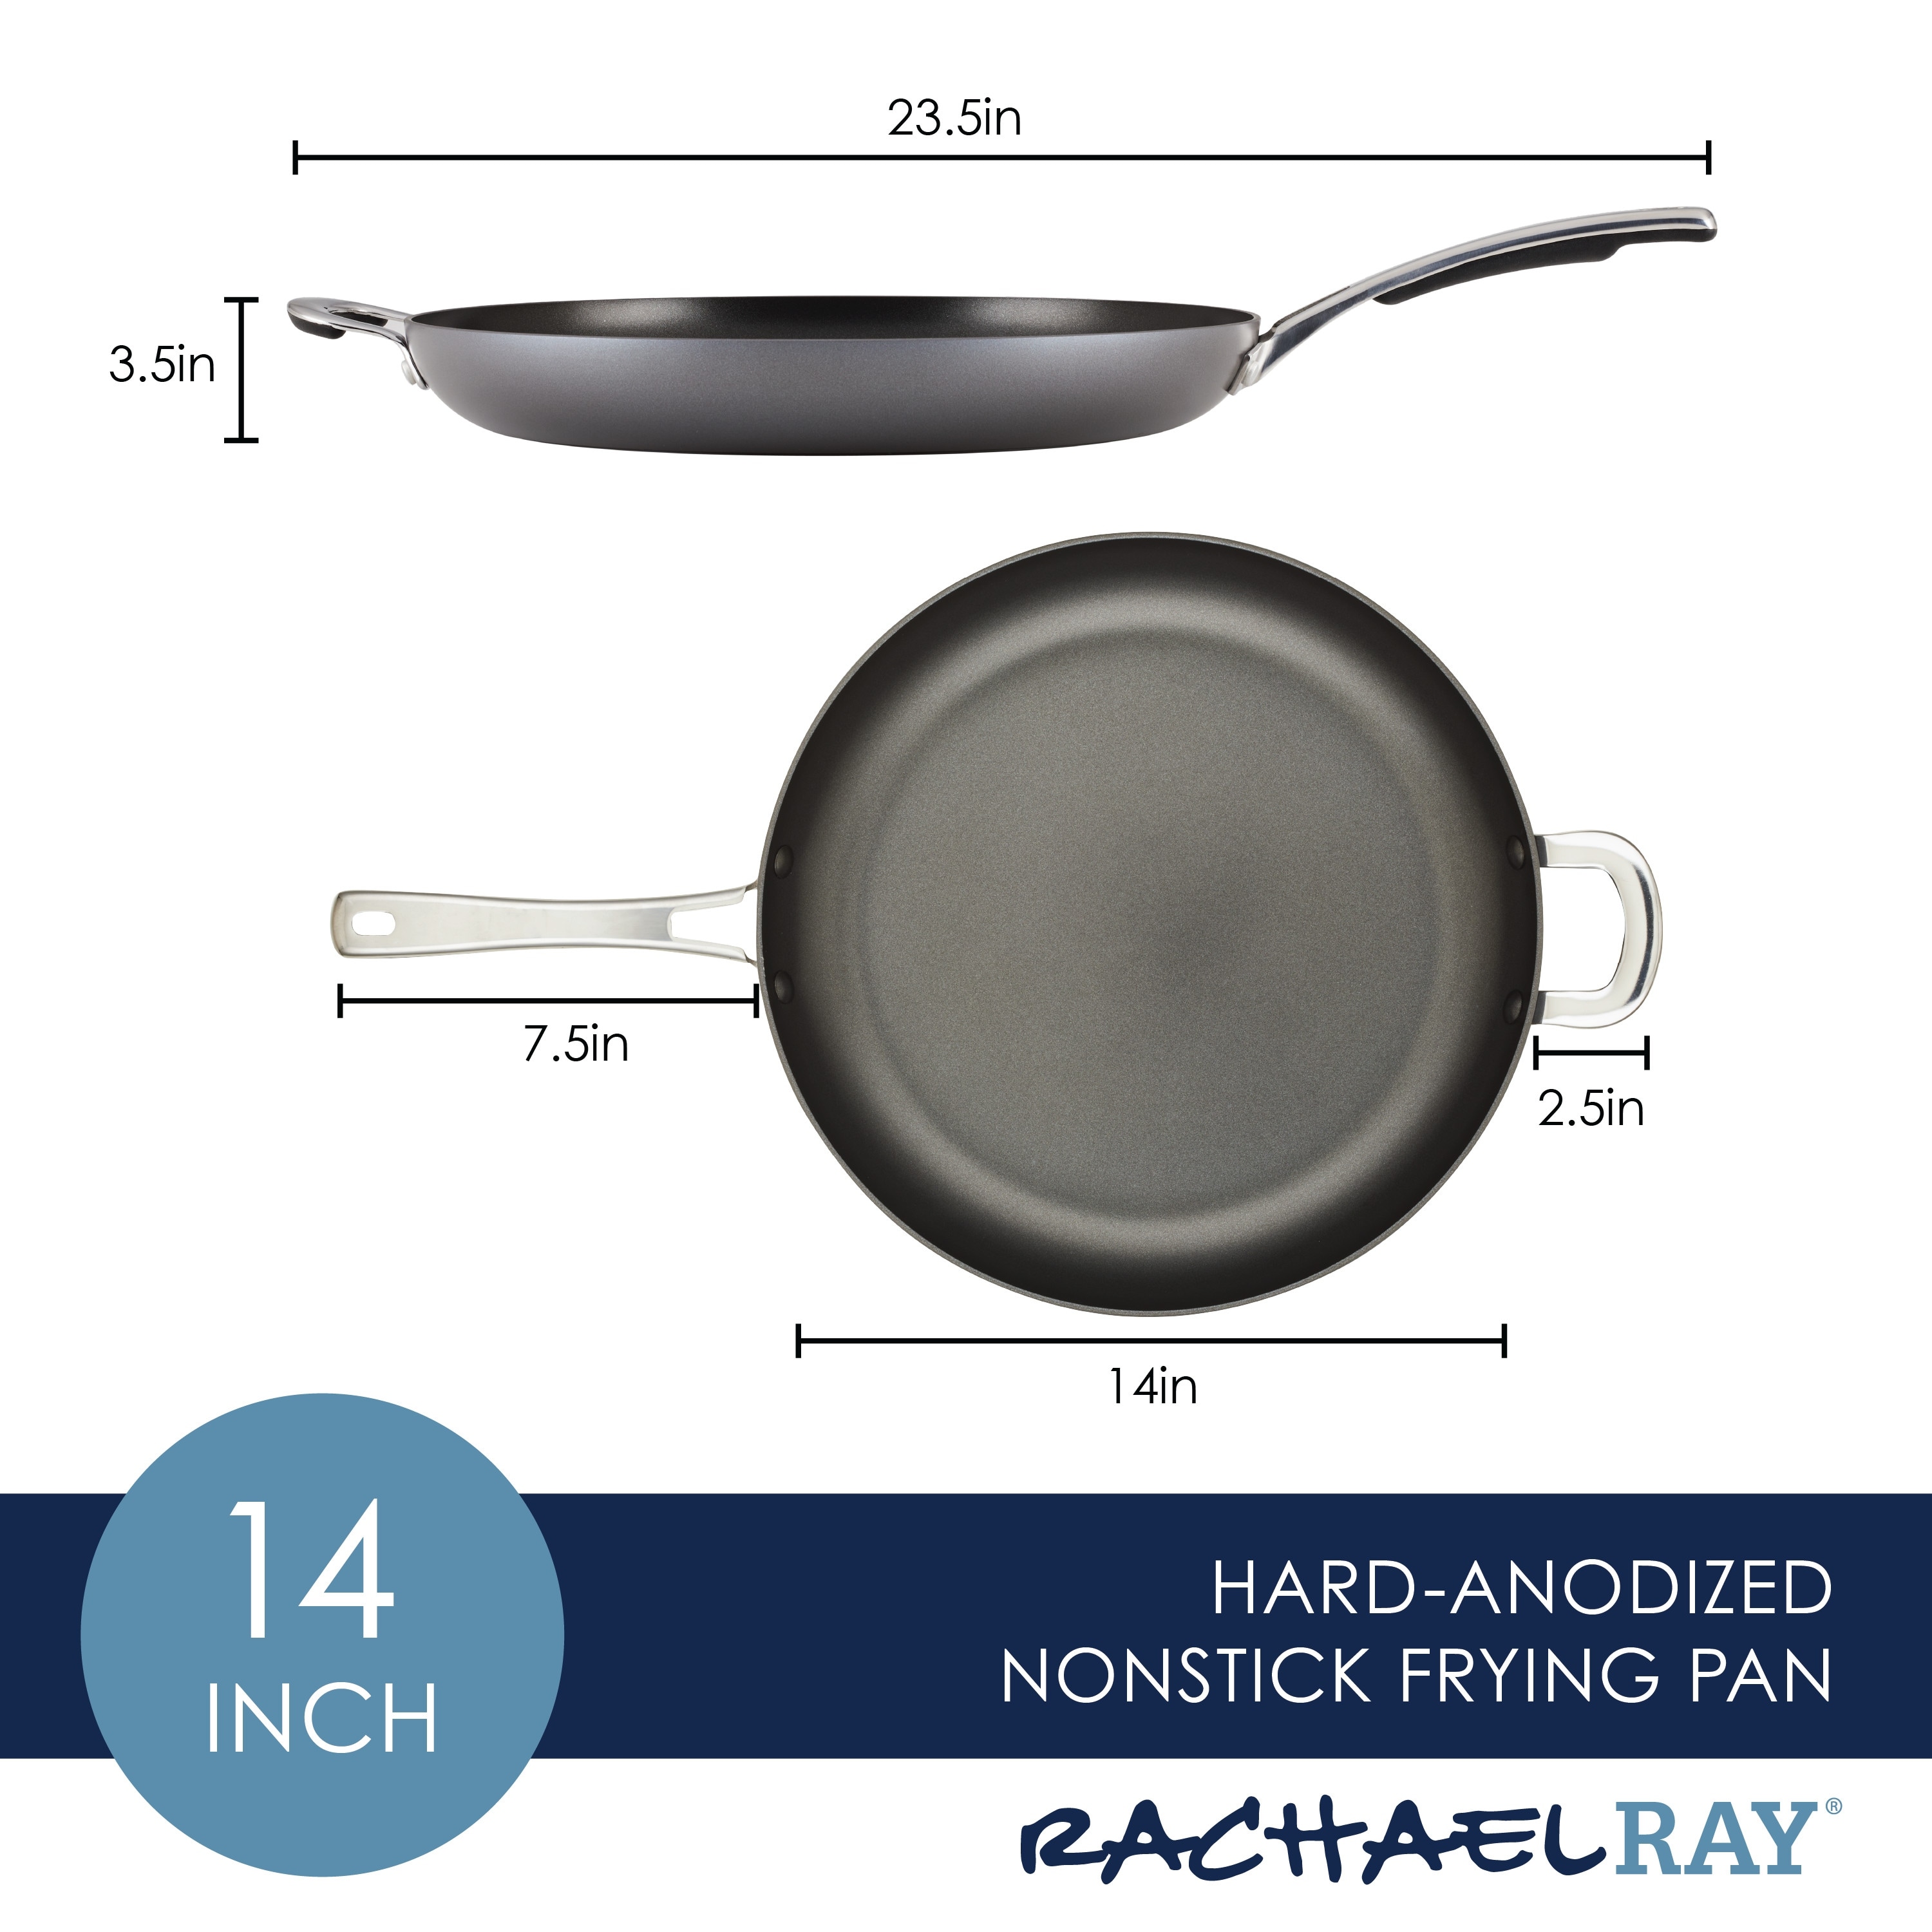 https://ak1.ostkcdn.com/images/products/is/images/direct/78aed7edb03ae26771f2fc242fe796e12d968c15/Rachael-Ray-Cook-%2B-Create-Hard-Anodized-Nonstick-Frying-Pan-with-Helper-Handle%2C-14-Inch%2C-Black.jpg